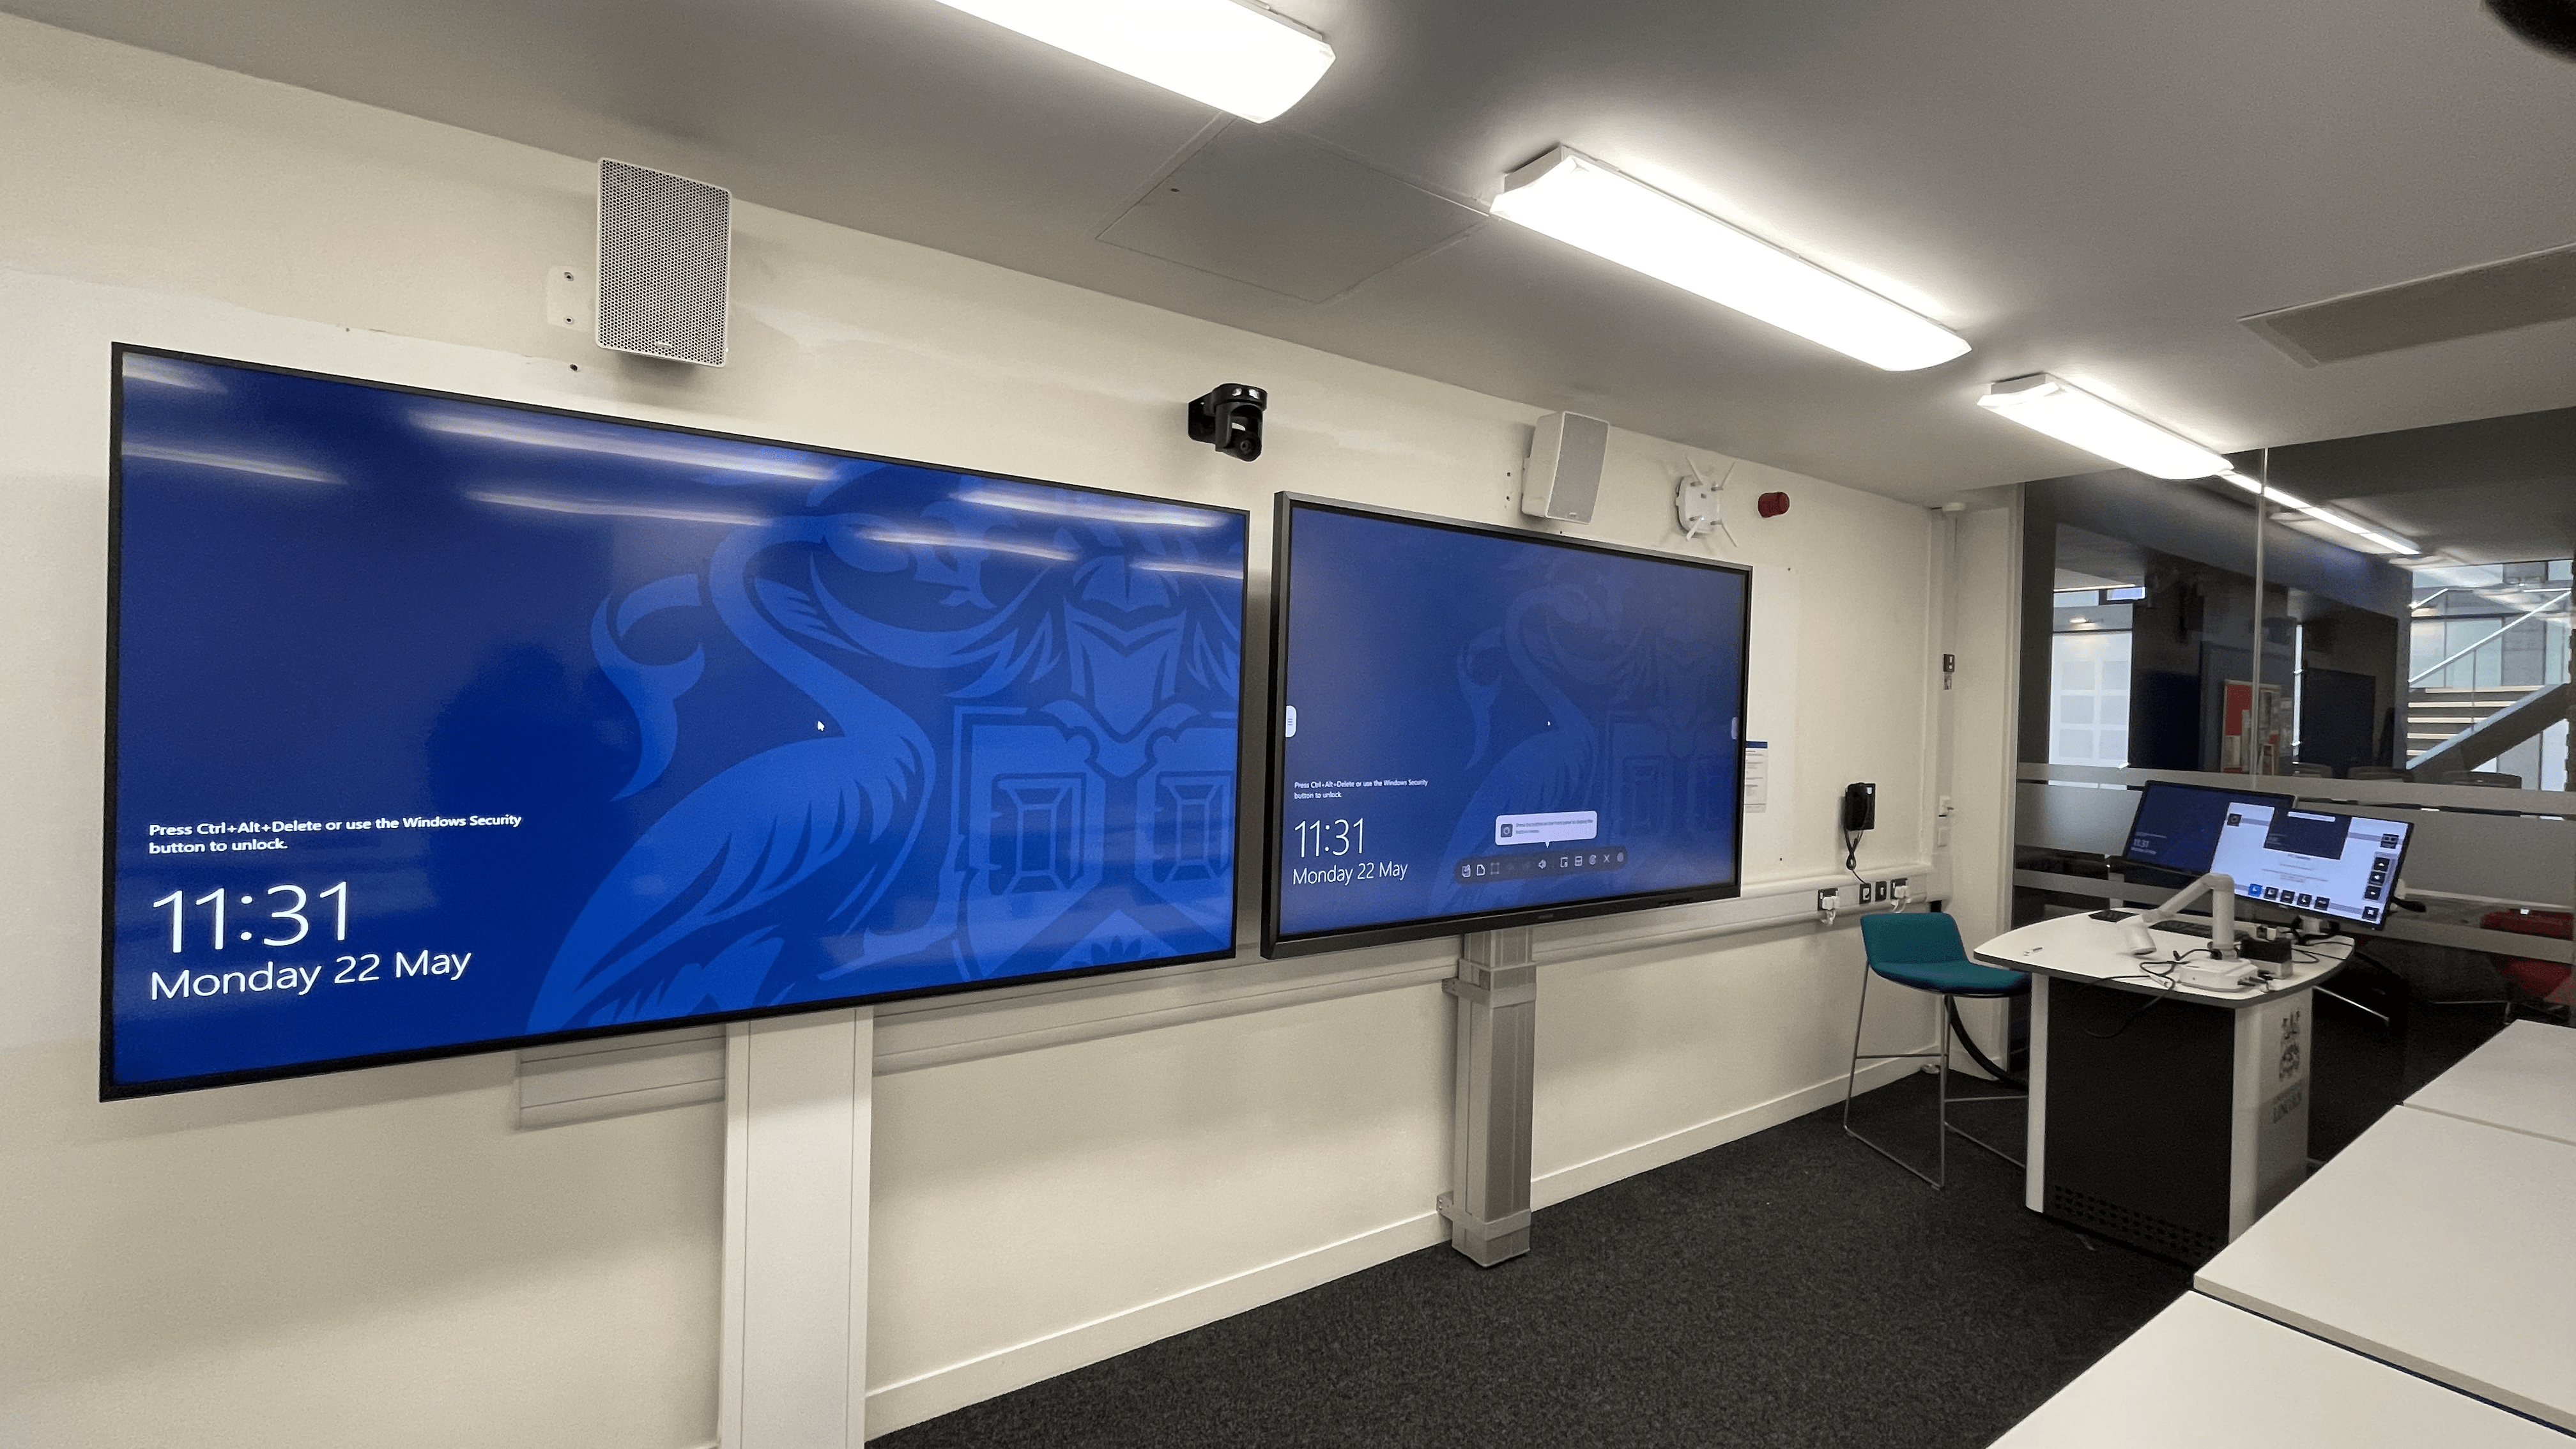 Two widescreen displays in a seminar room.